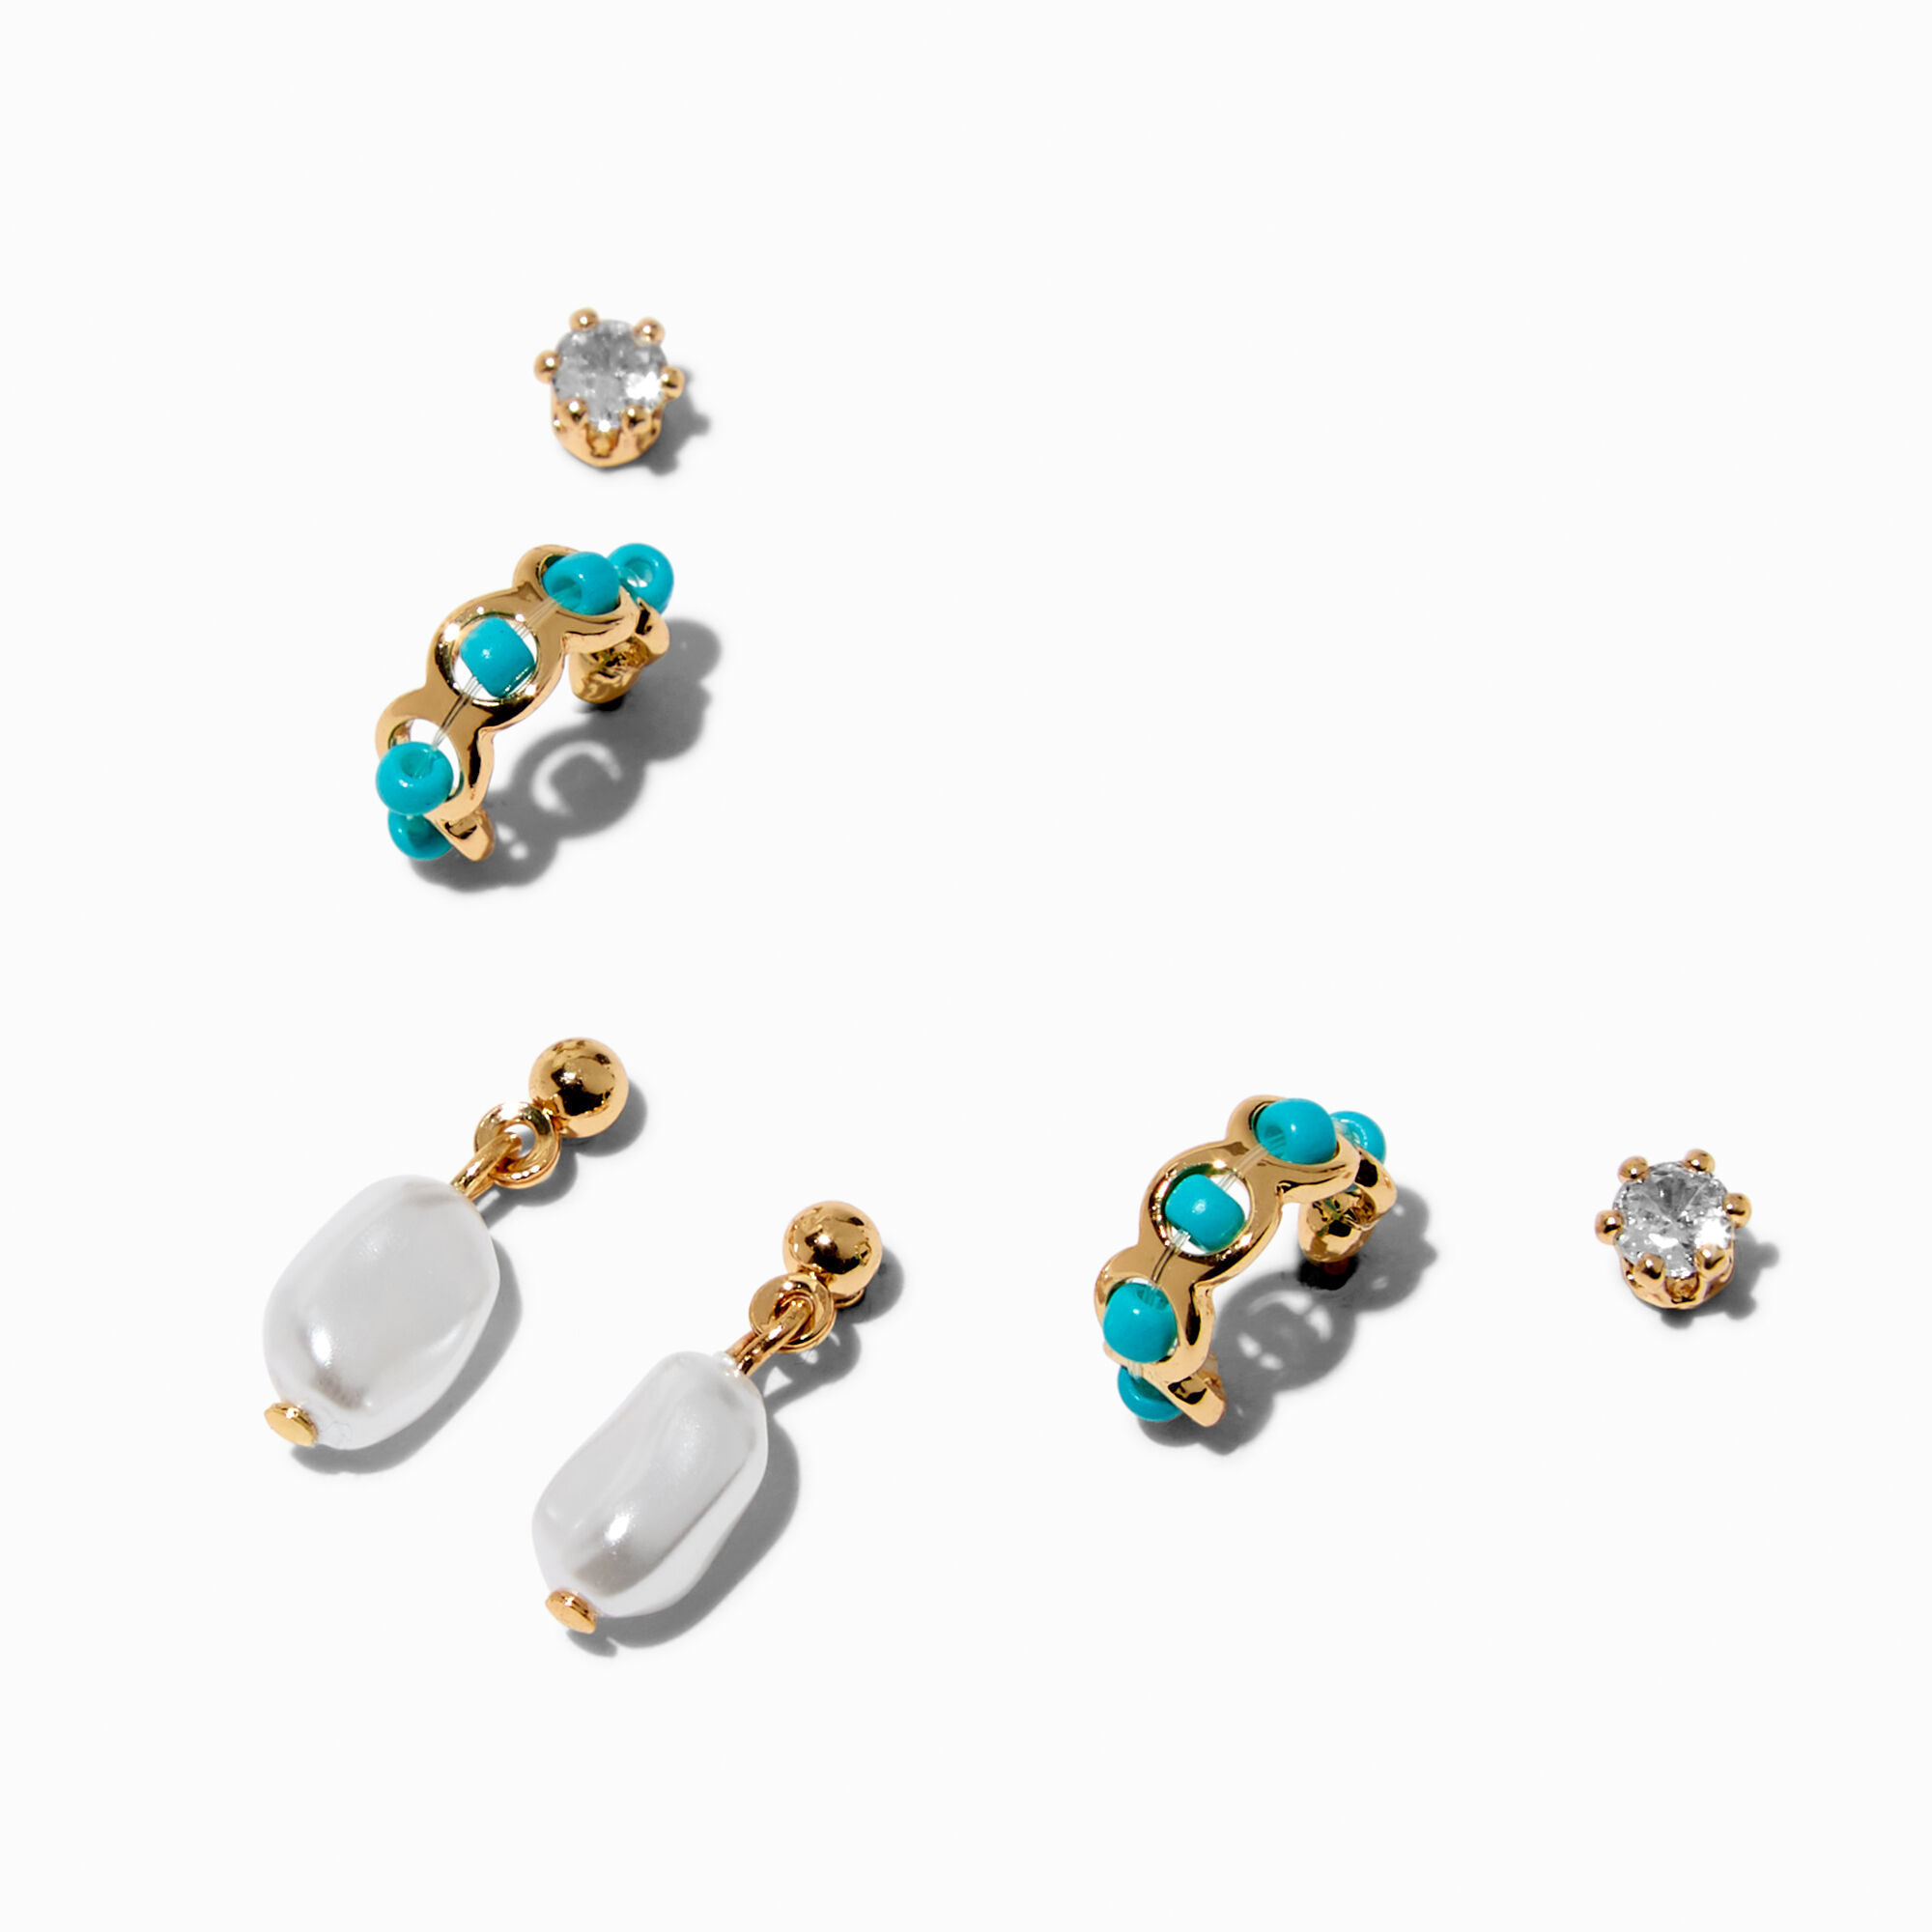 View Claires GoldTone Cubic Zirconia Earring Stackables Set 3 Pack Turquoise information